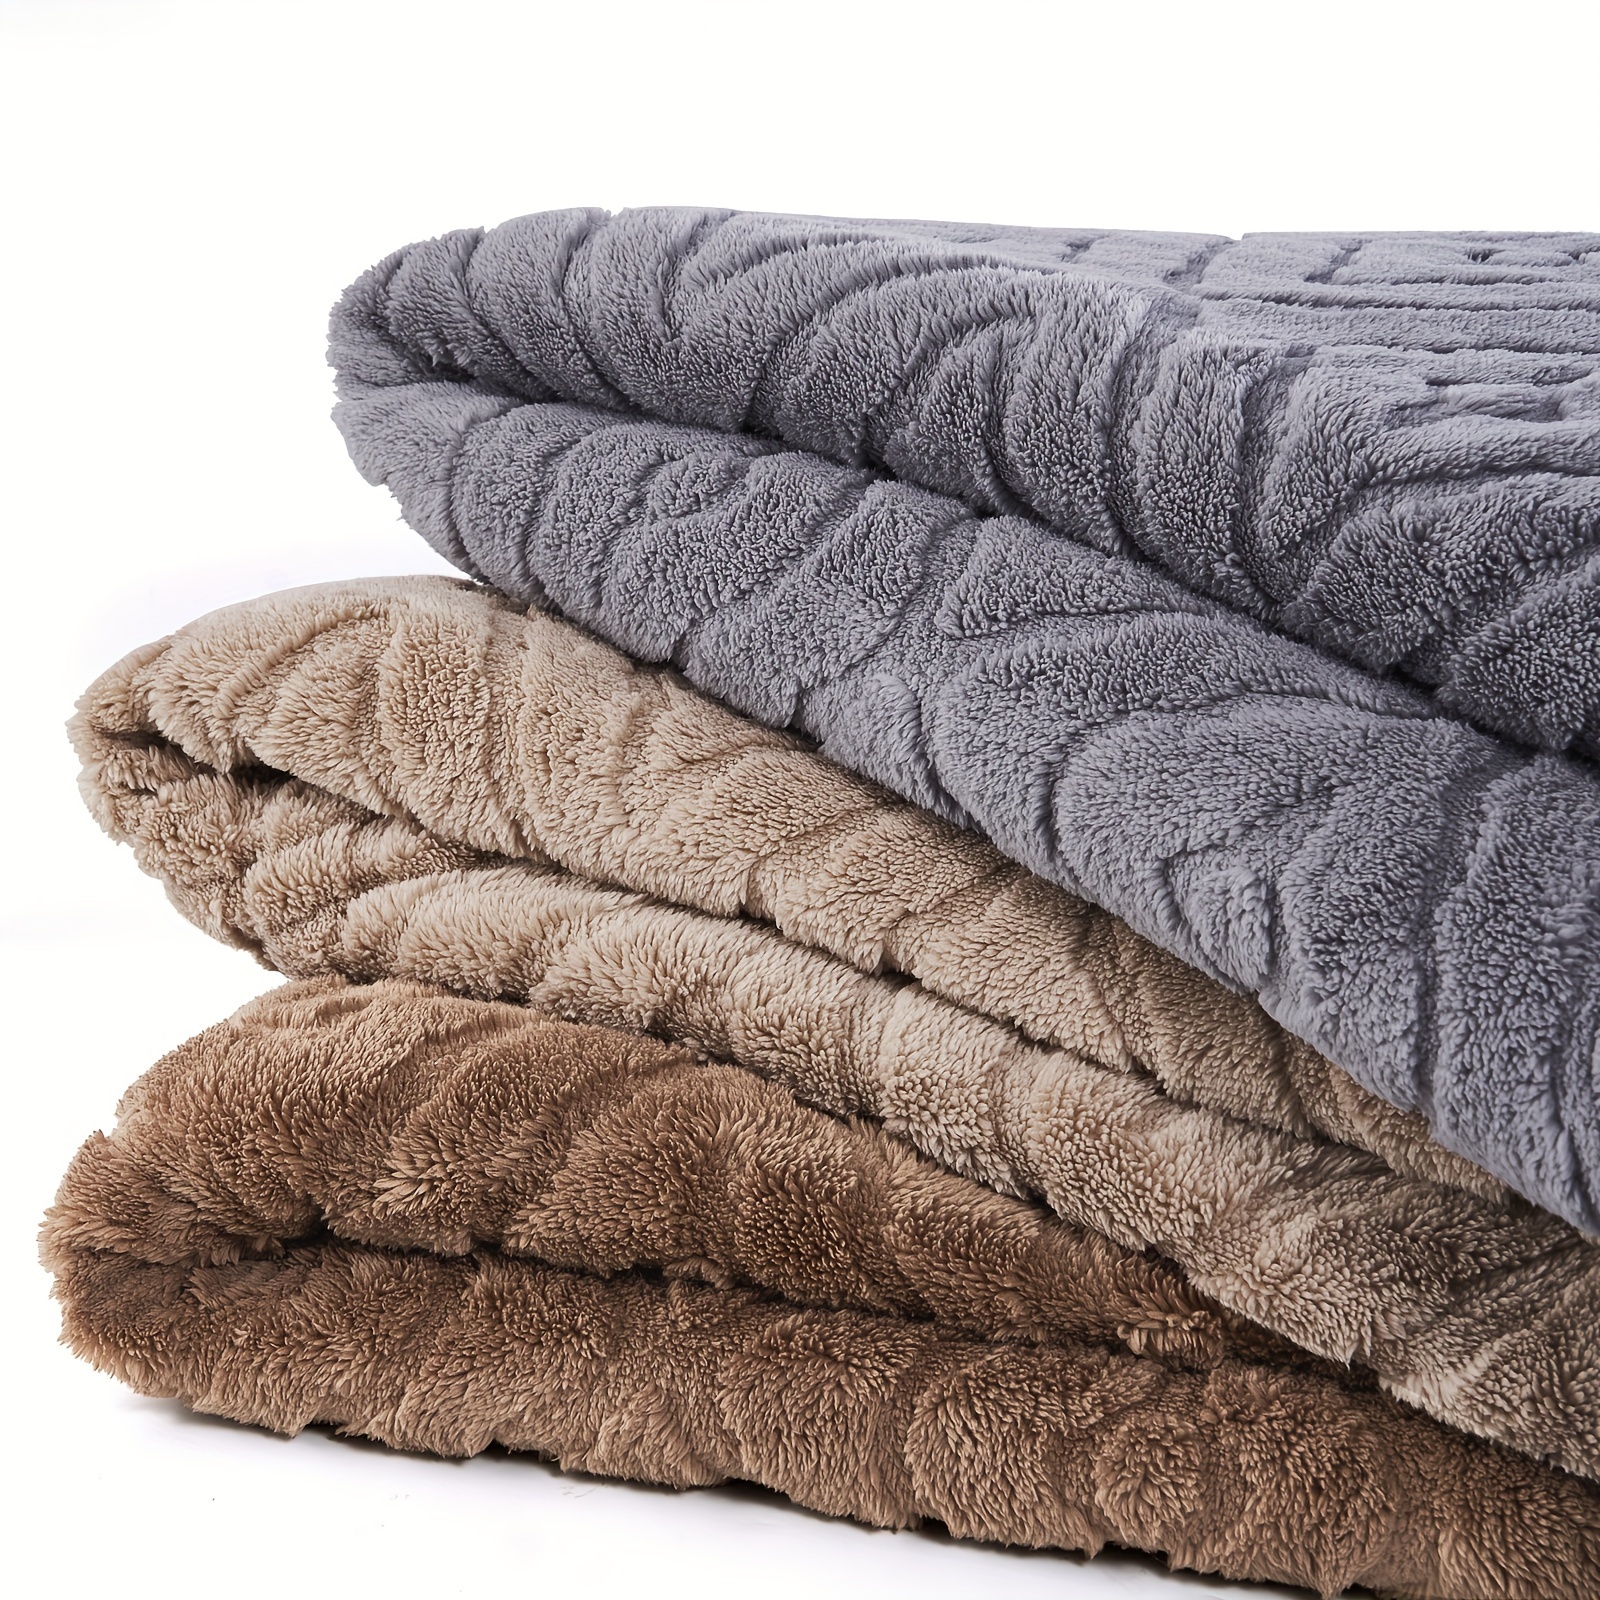 

Sherpa Fleece Throw Blanket-3d Stylish Design, Thick And Warm Blanket For Winter, Soft And Fuzzy Throw Blanket For Sofa, Soft, Plush, Warm, Thick Pets Blanket